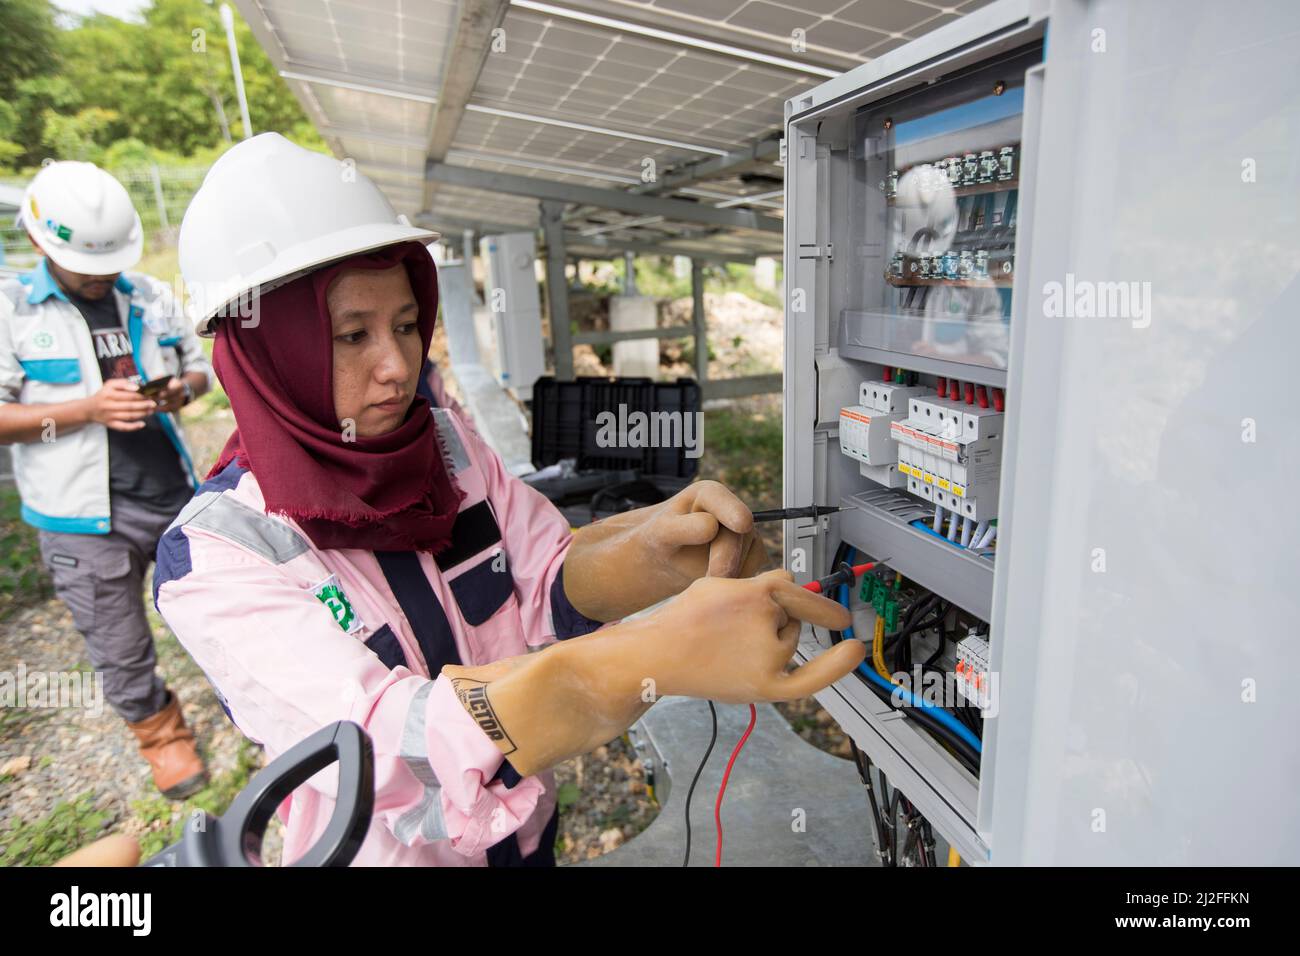 Junior electrical technician, Verawati (23), inspects and maintains solar panels on Karampuang Island, Indonesia, which were installed as part of the Stock Photo